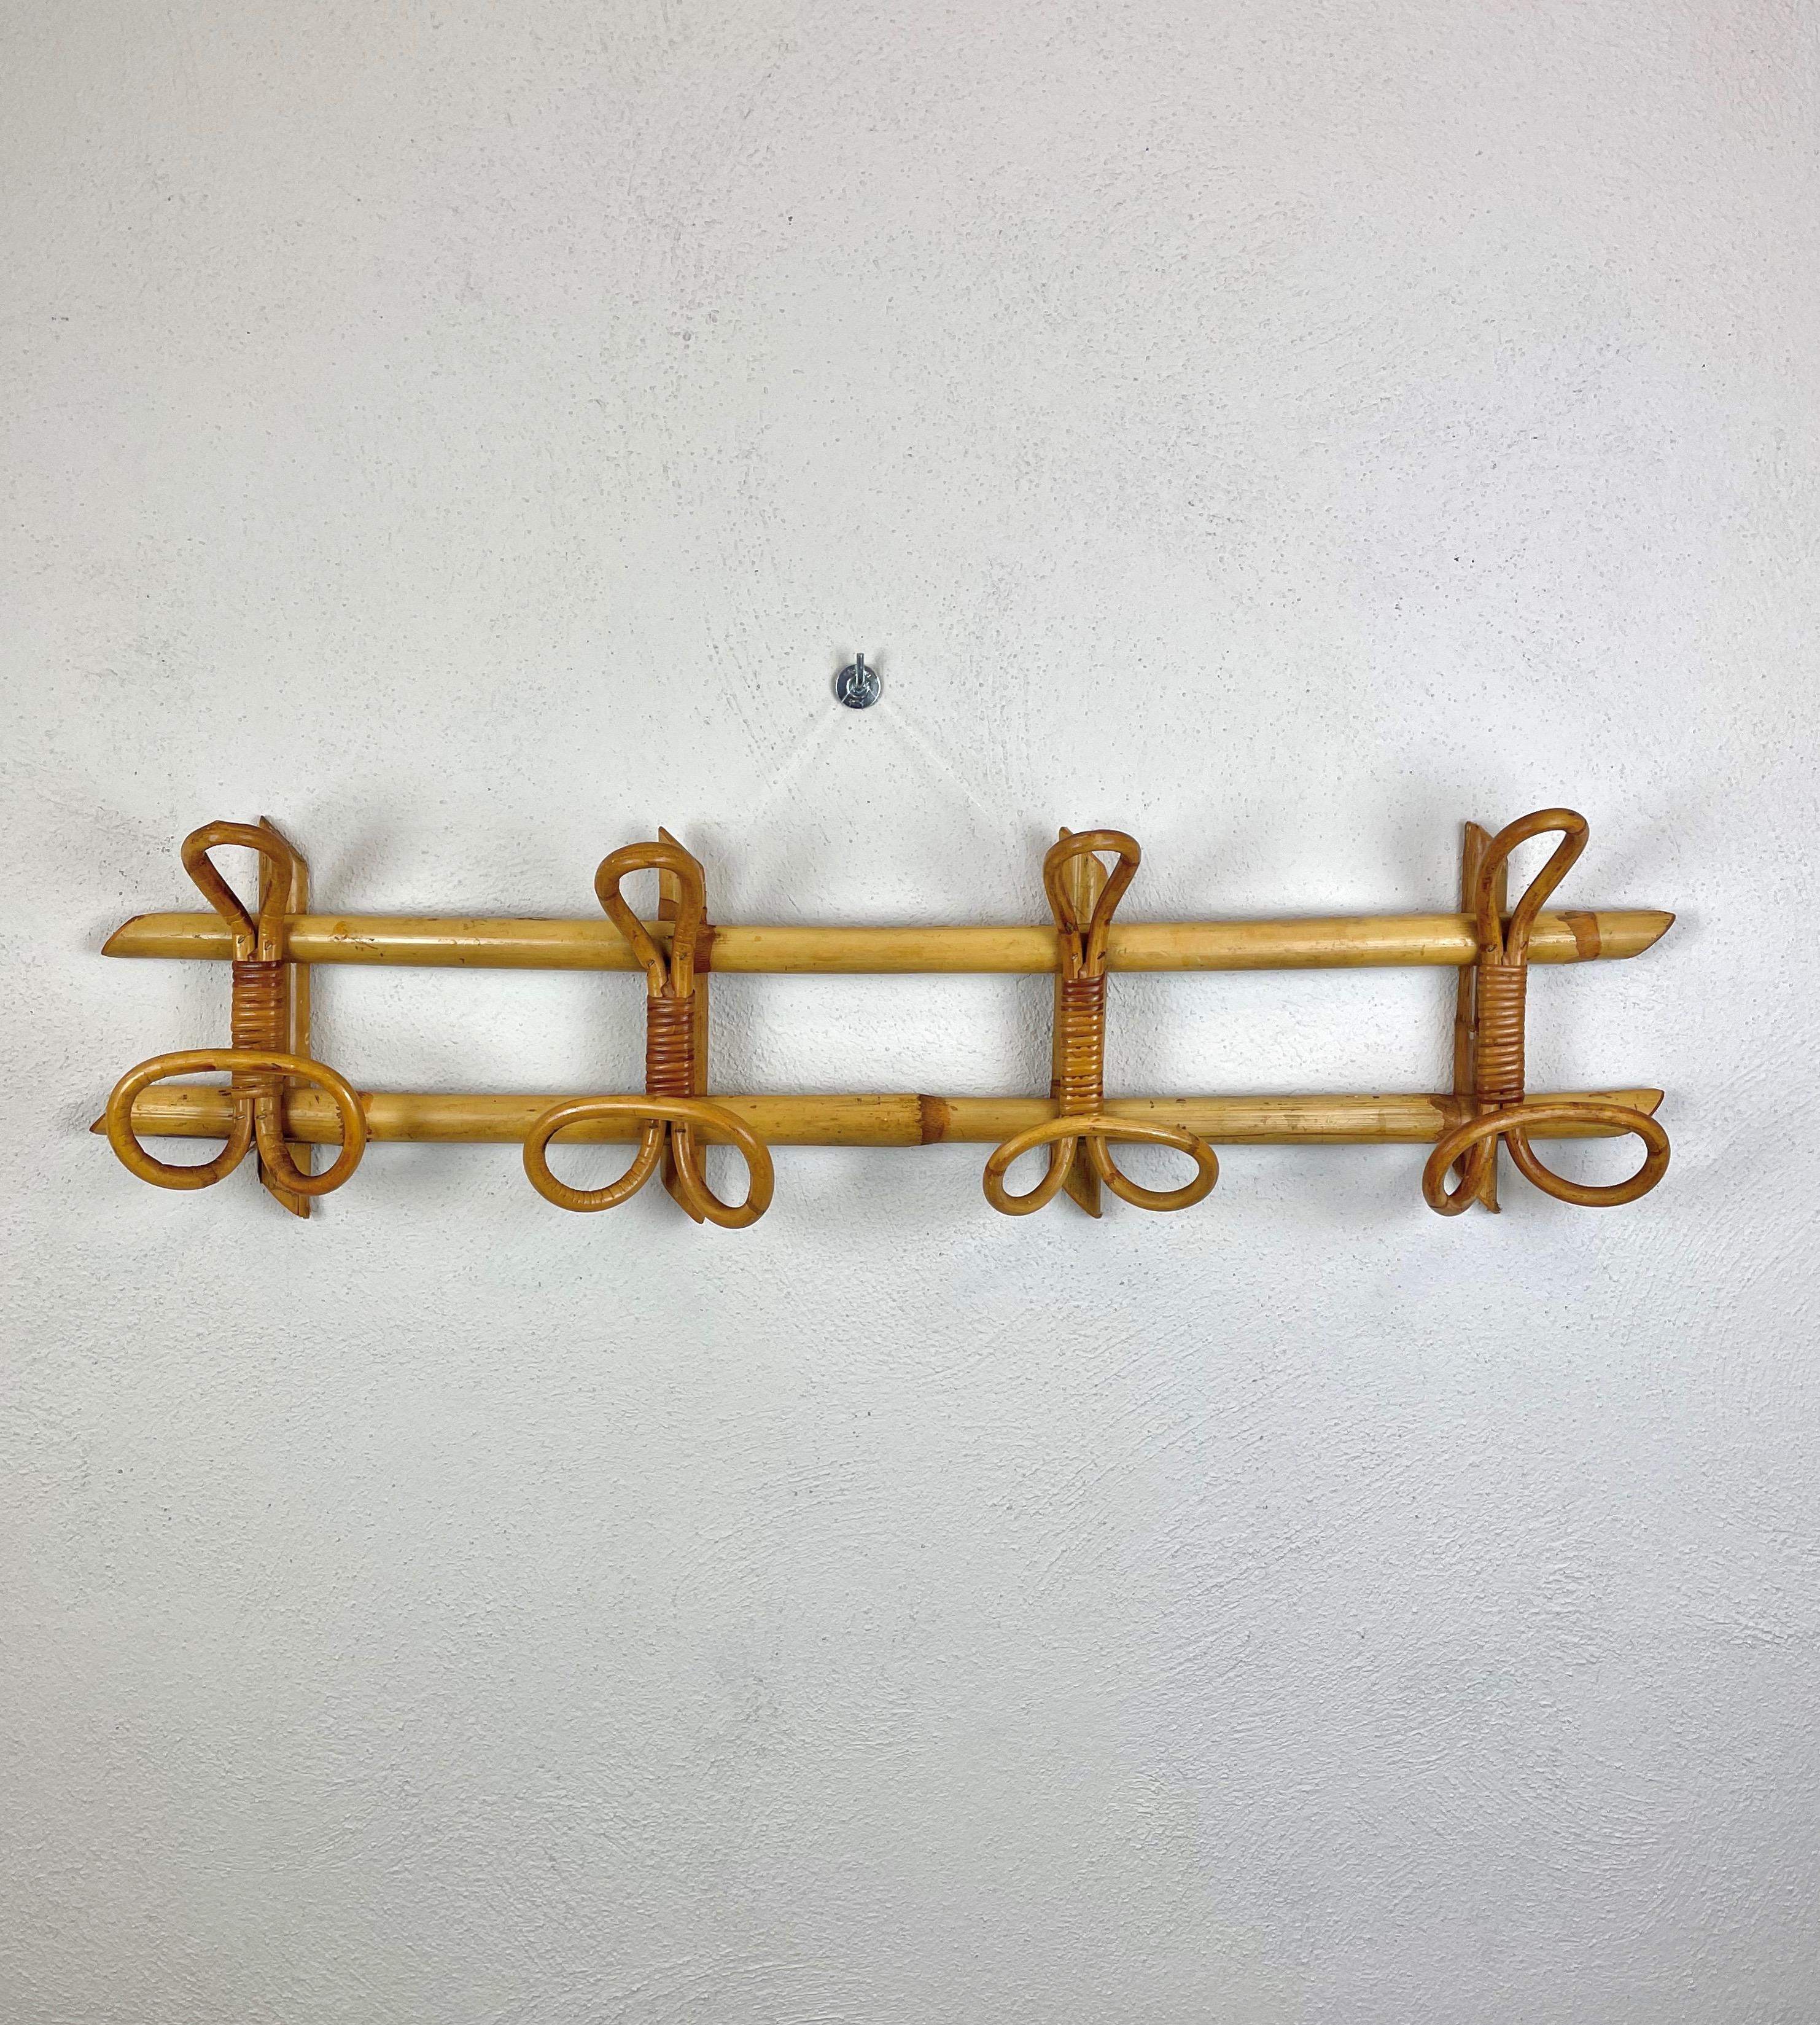 French Riviera mid-century rattan and bamboo coat hanger made in Italy during the 1960s.

This wonderful piece features a structure in bamboo canes and four rattan upper hooks and lower hooks for hanging coats.